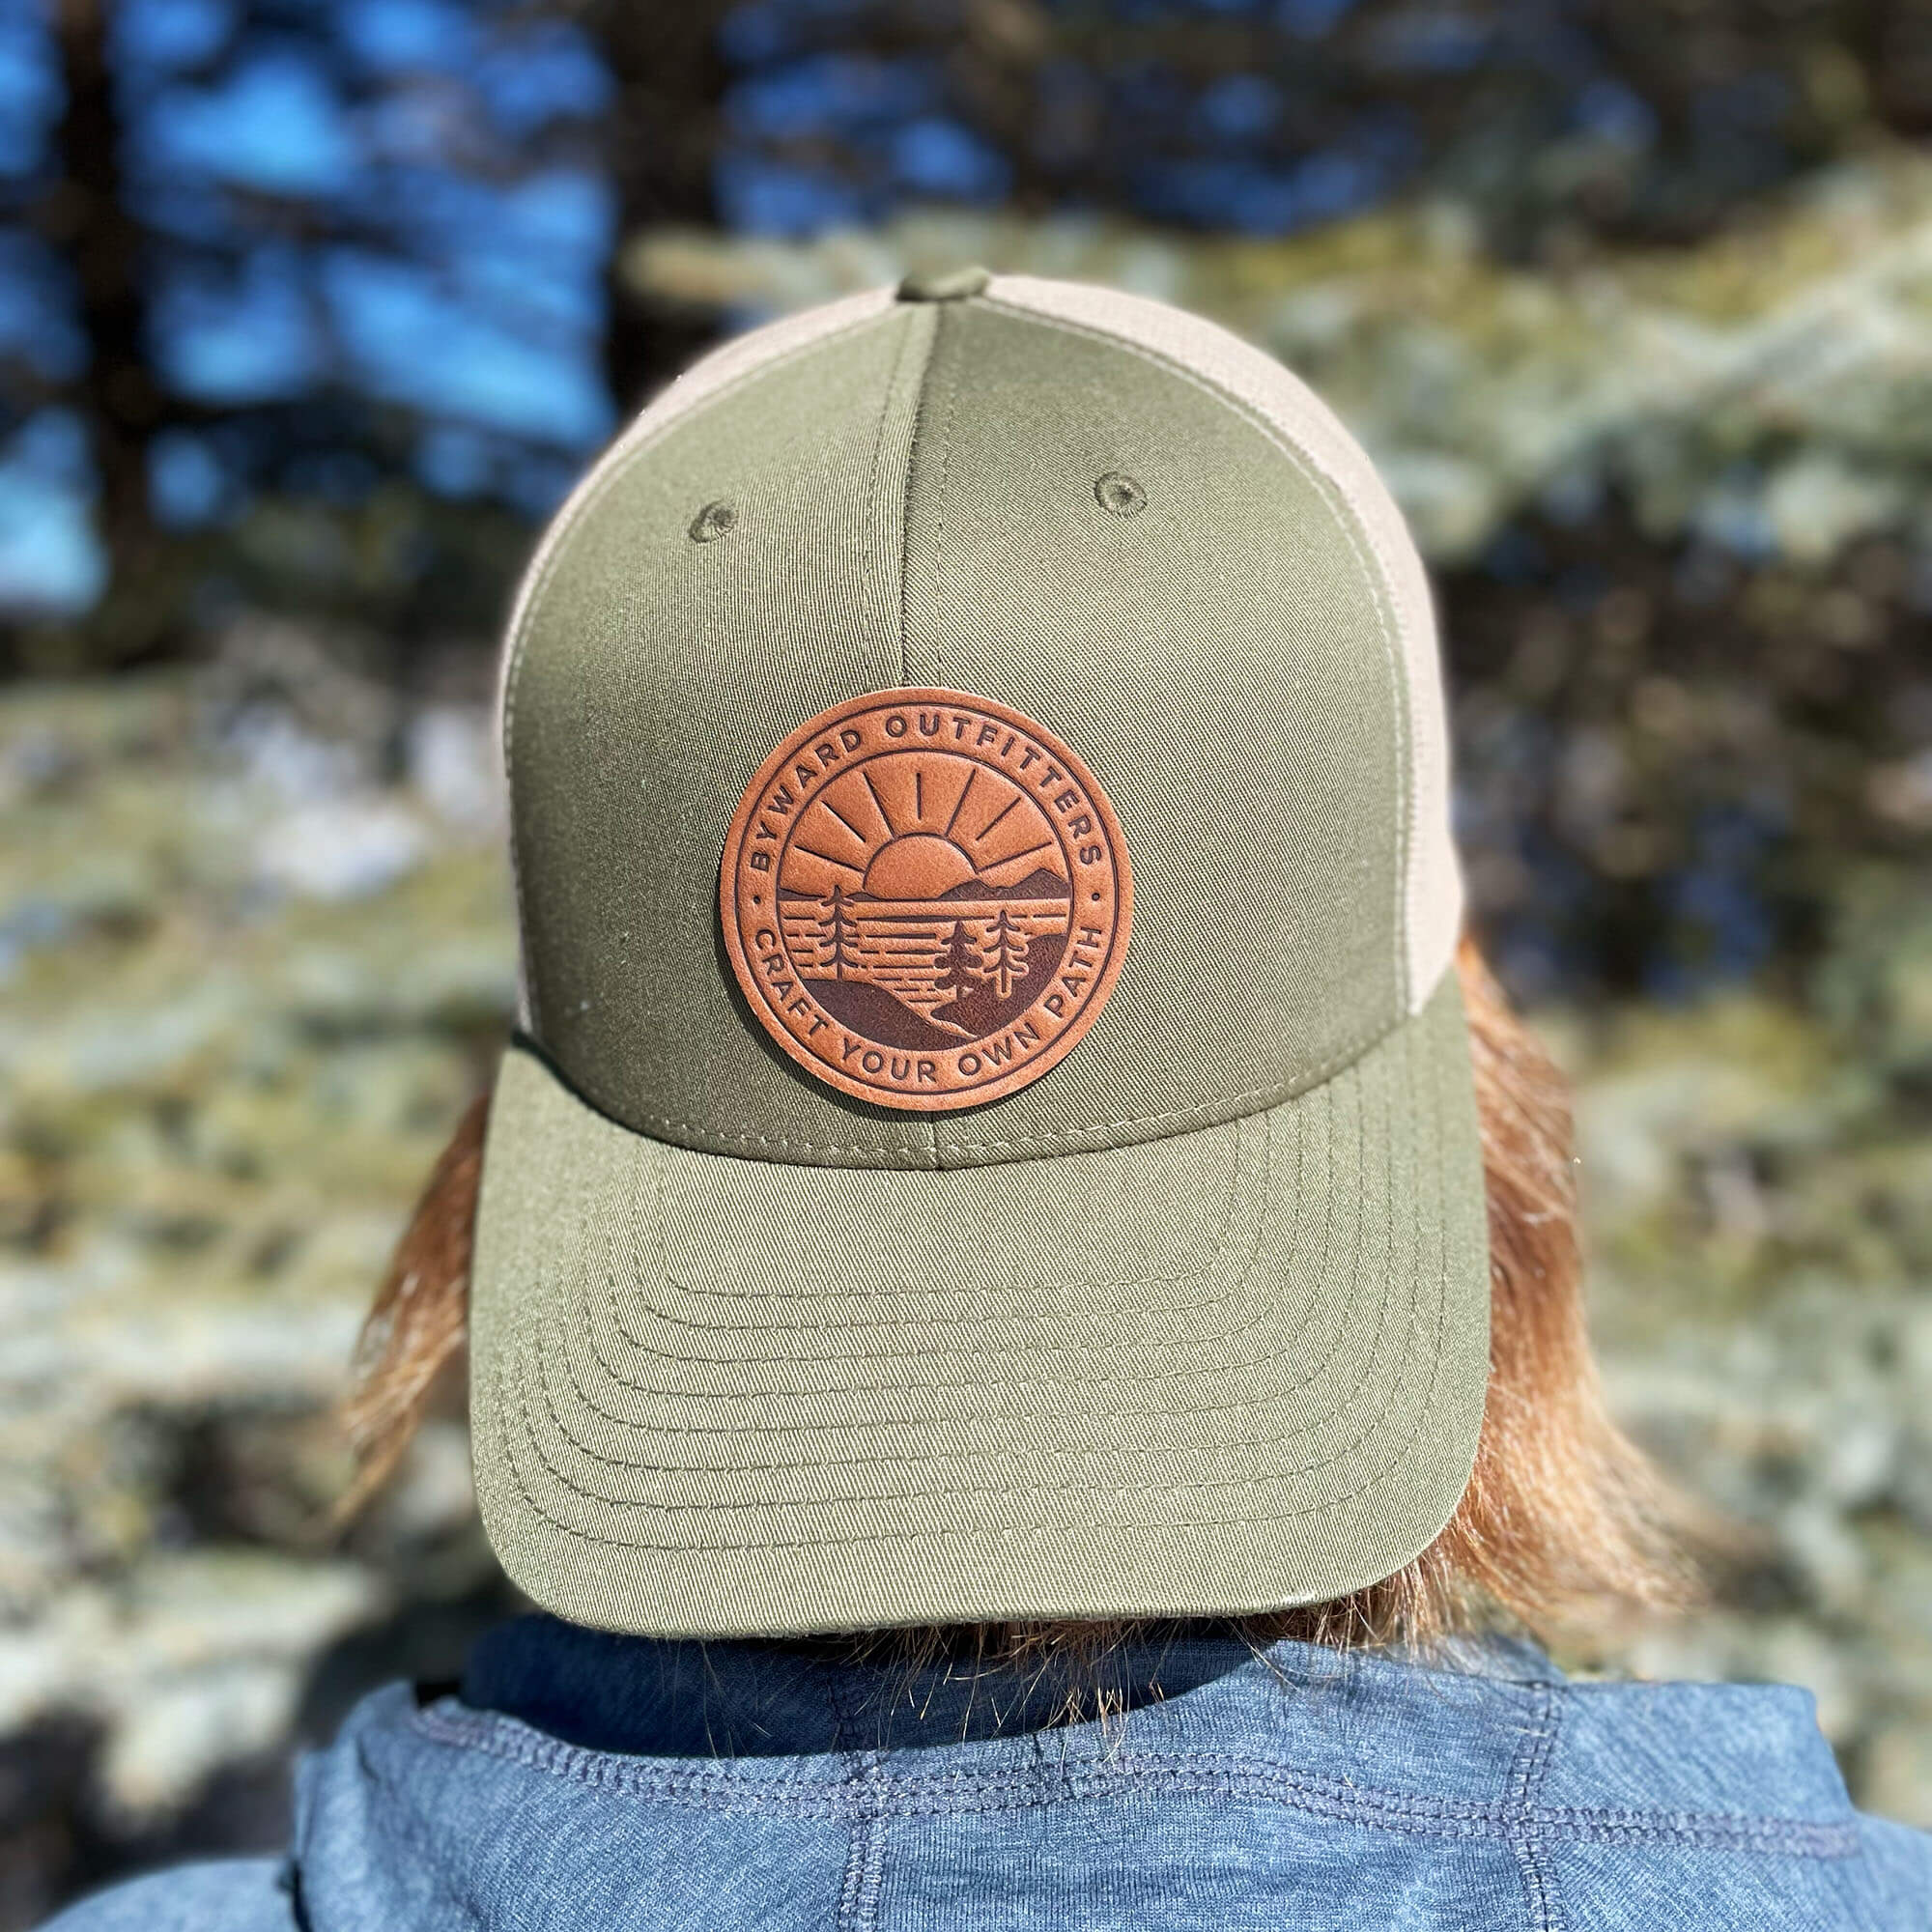 Moss Green and khaki trucker hat with full-grain leather patch of Scenic Sunrise | BLACK-005-002, CHARC-005-002, NAVY-005-002, HGREY-005-002, MOSS-005-002, BROWN-005-002